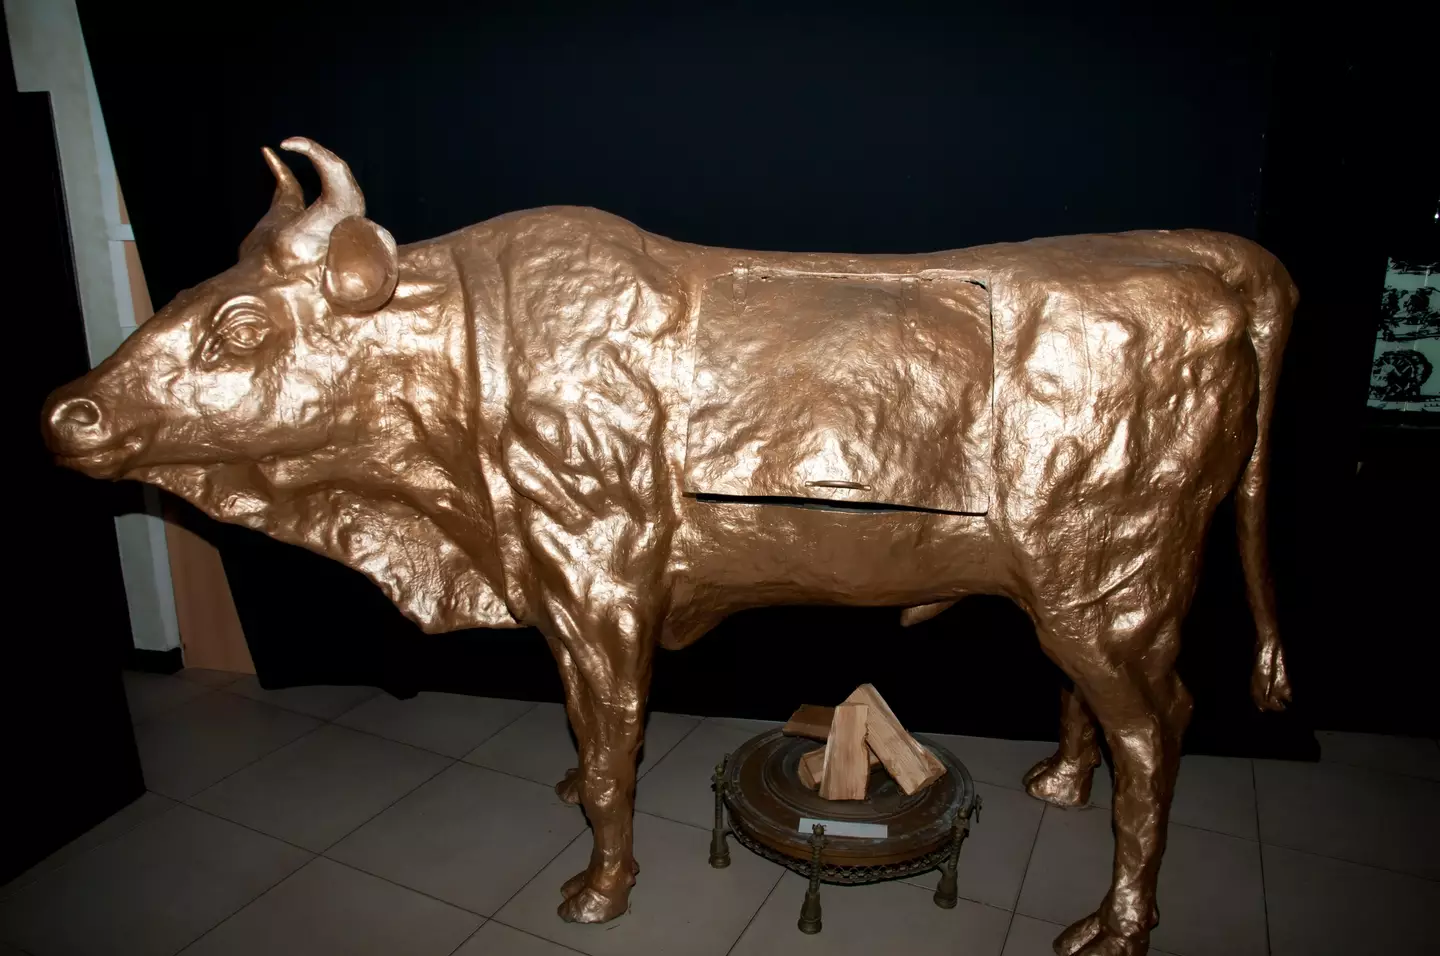 You would certainly not want to end up inside the Brazen Bull.